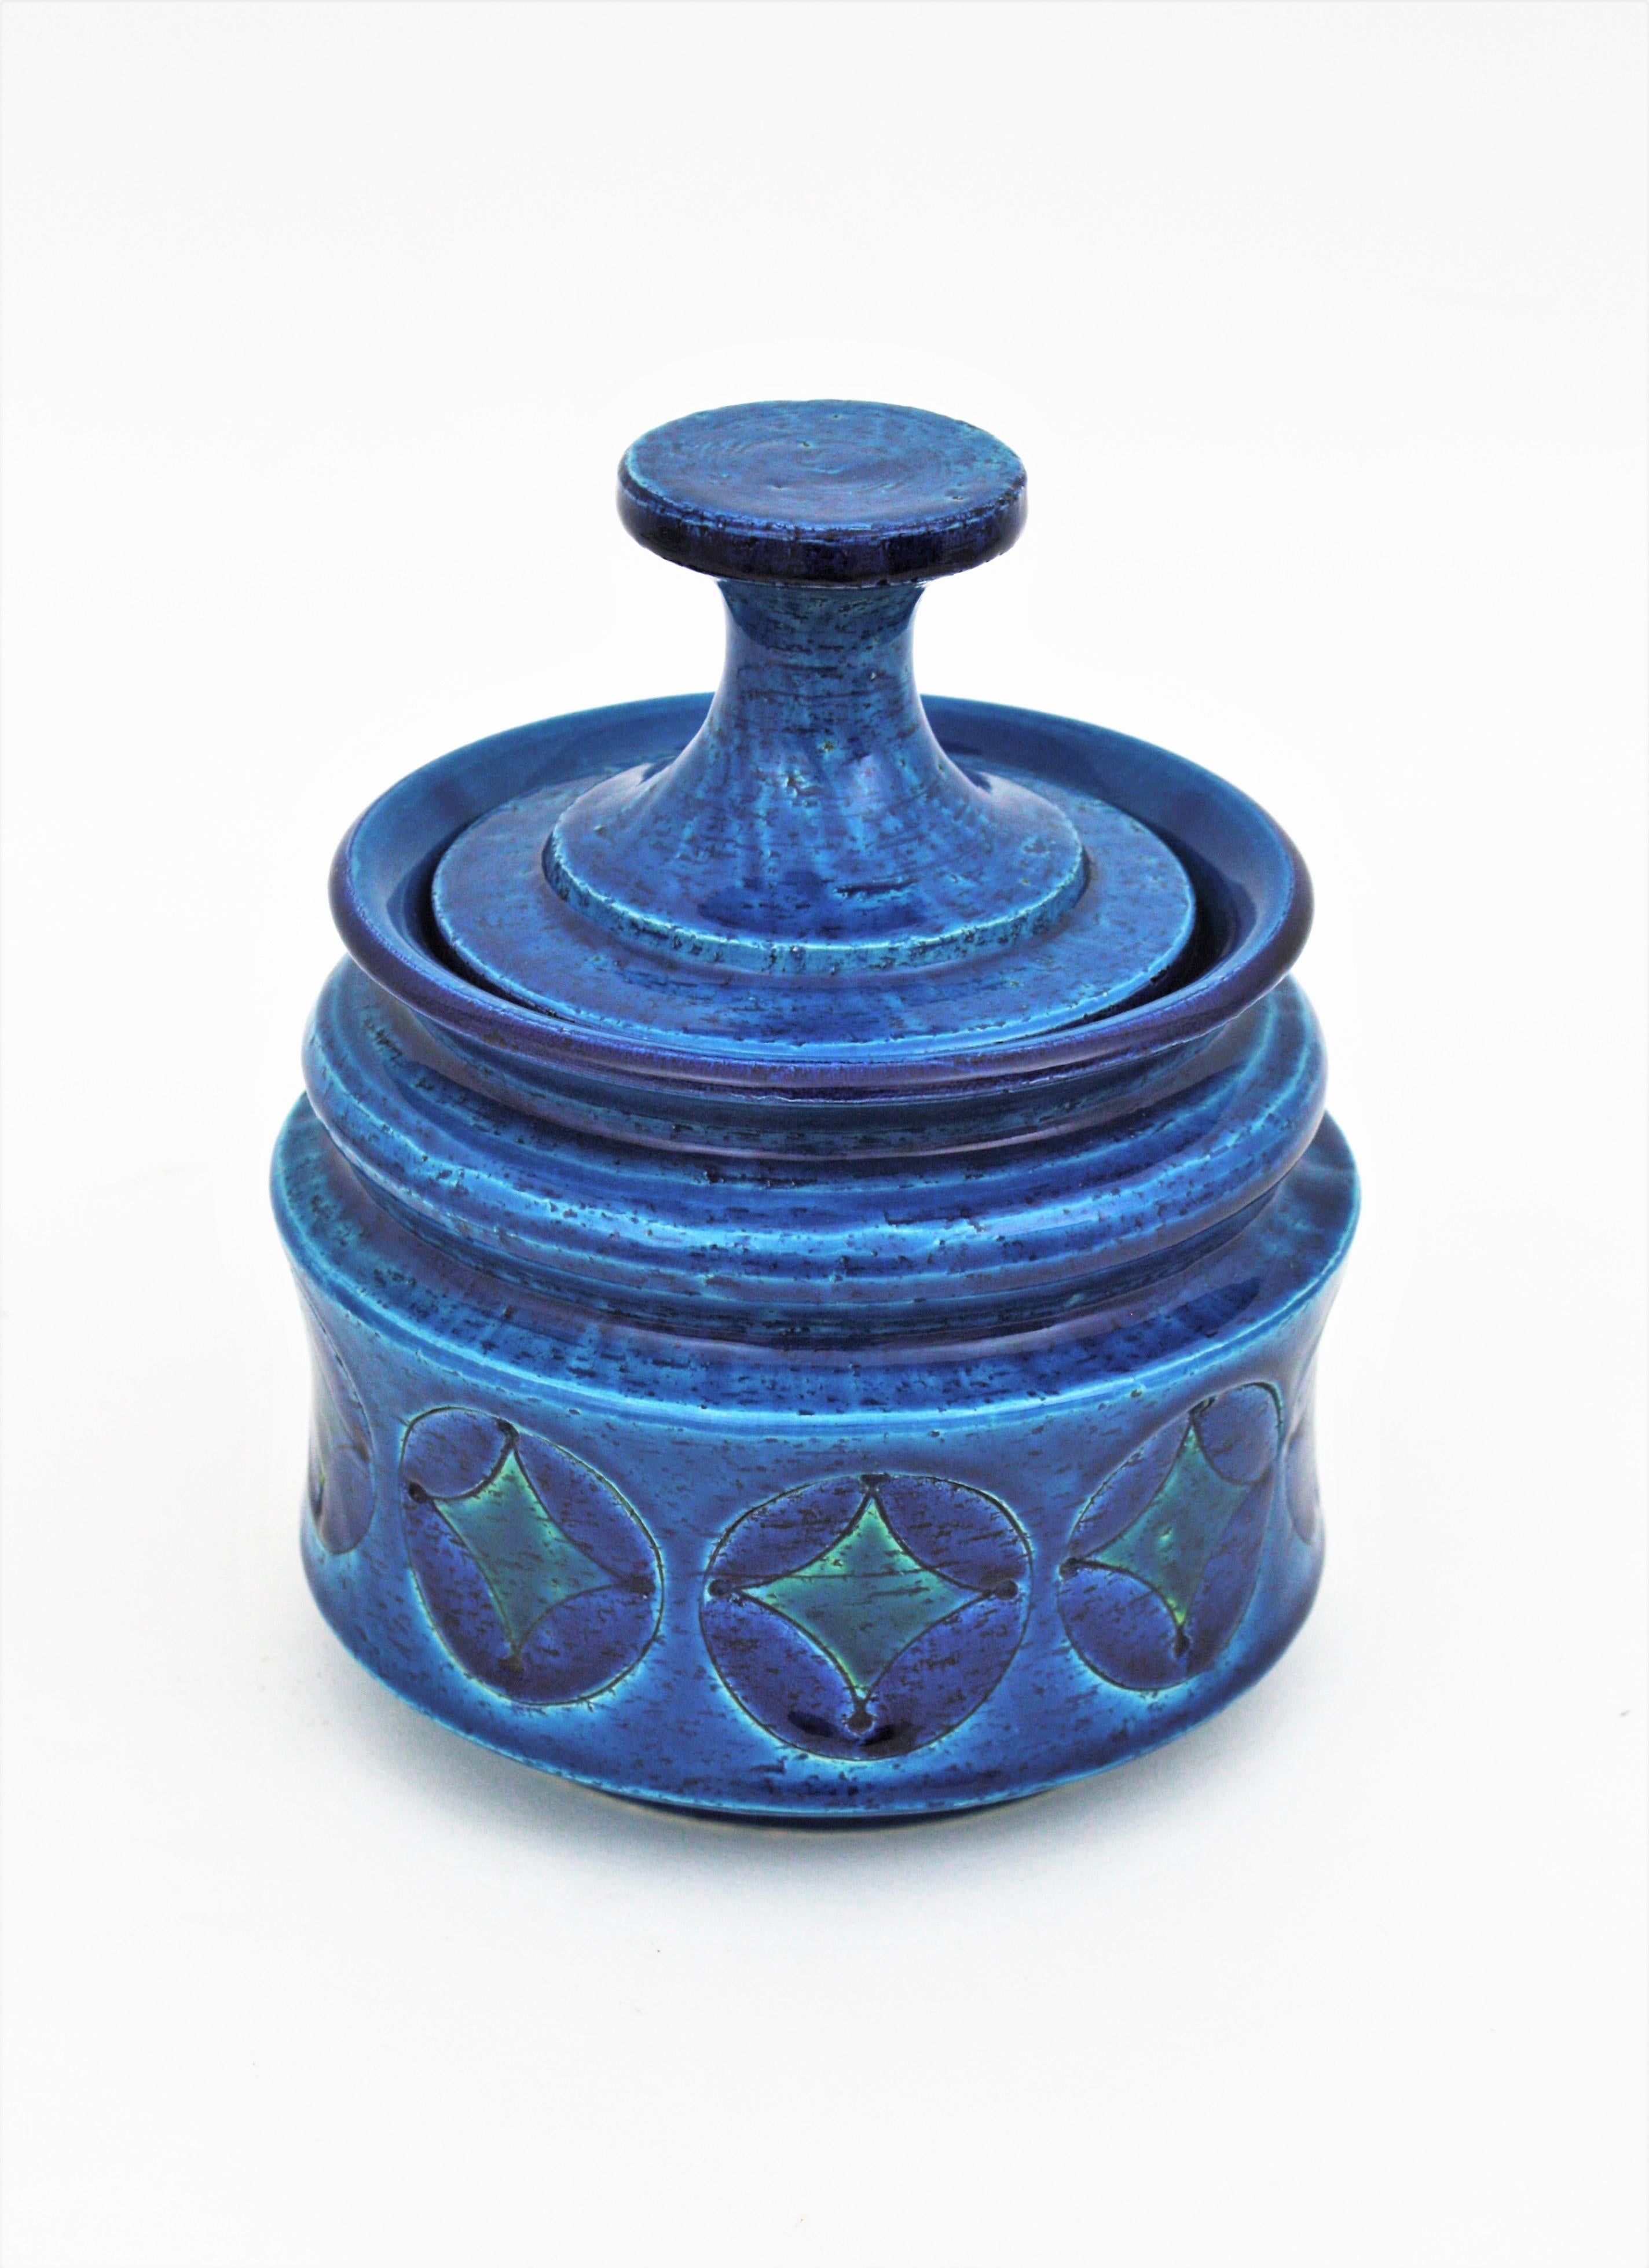 Unusual Aldo Londi for Bitossi Rimini blue lidded candy box, pot or jar, Italy, 1960s
This stunning glazed ceramic canister with lid has a pattern with circles in dark blue and rhombus inside in shades of green.
Excellent vintage condition.
This